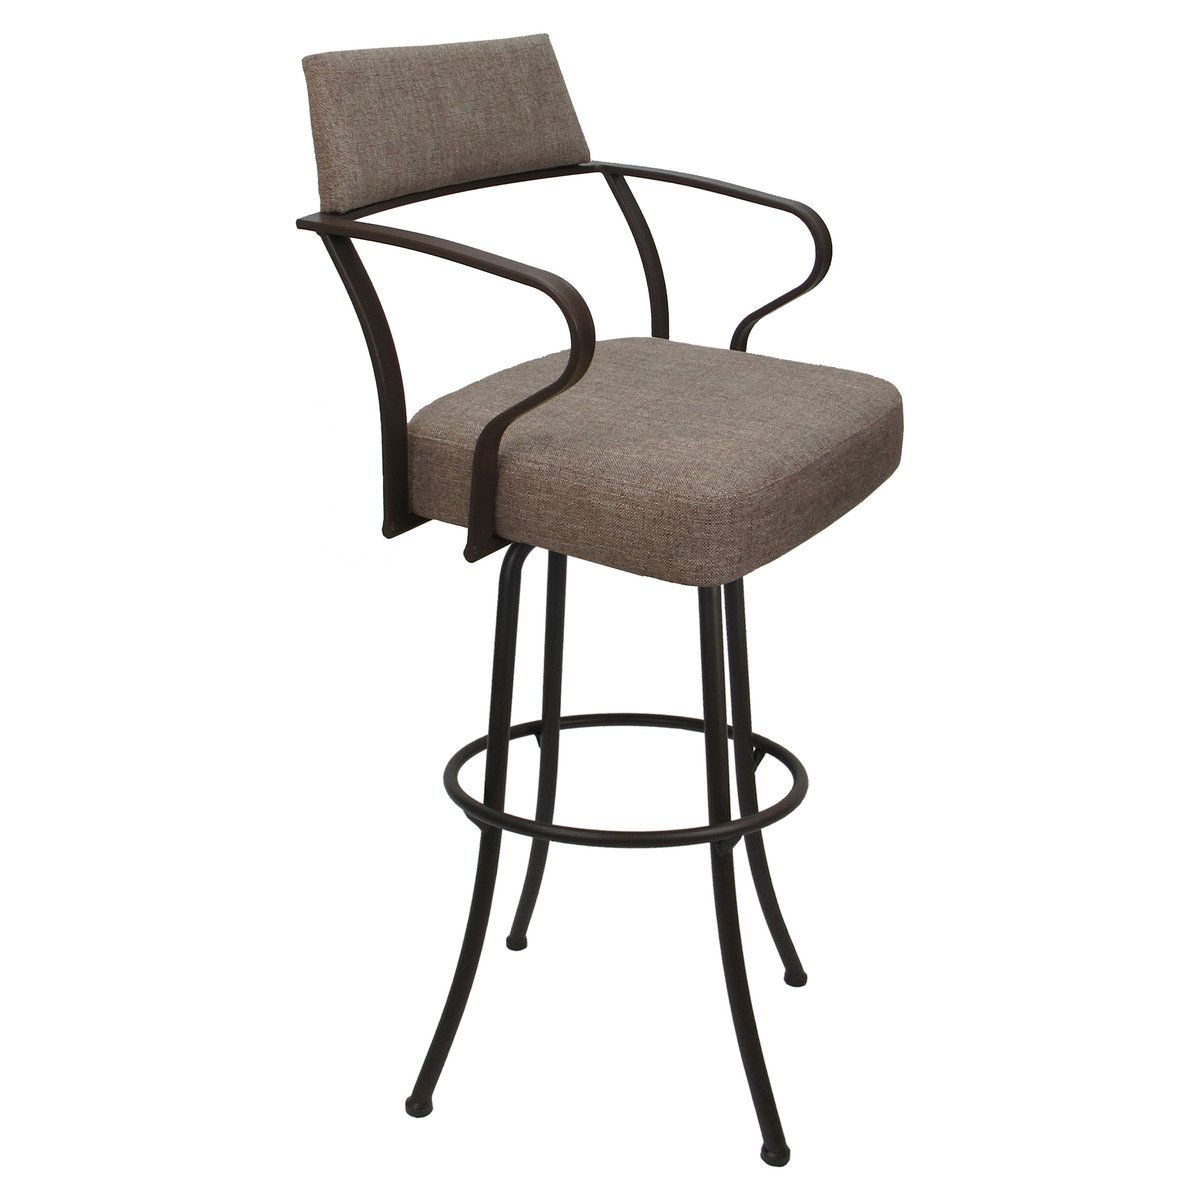 Reach New Heights in Style with Extra Tall Swivel Bar Stools